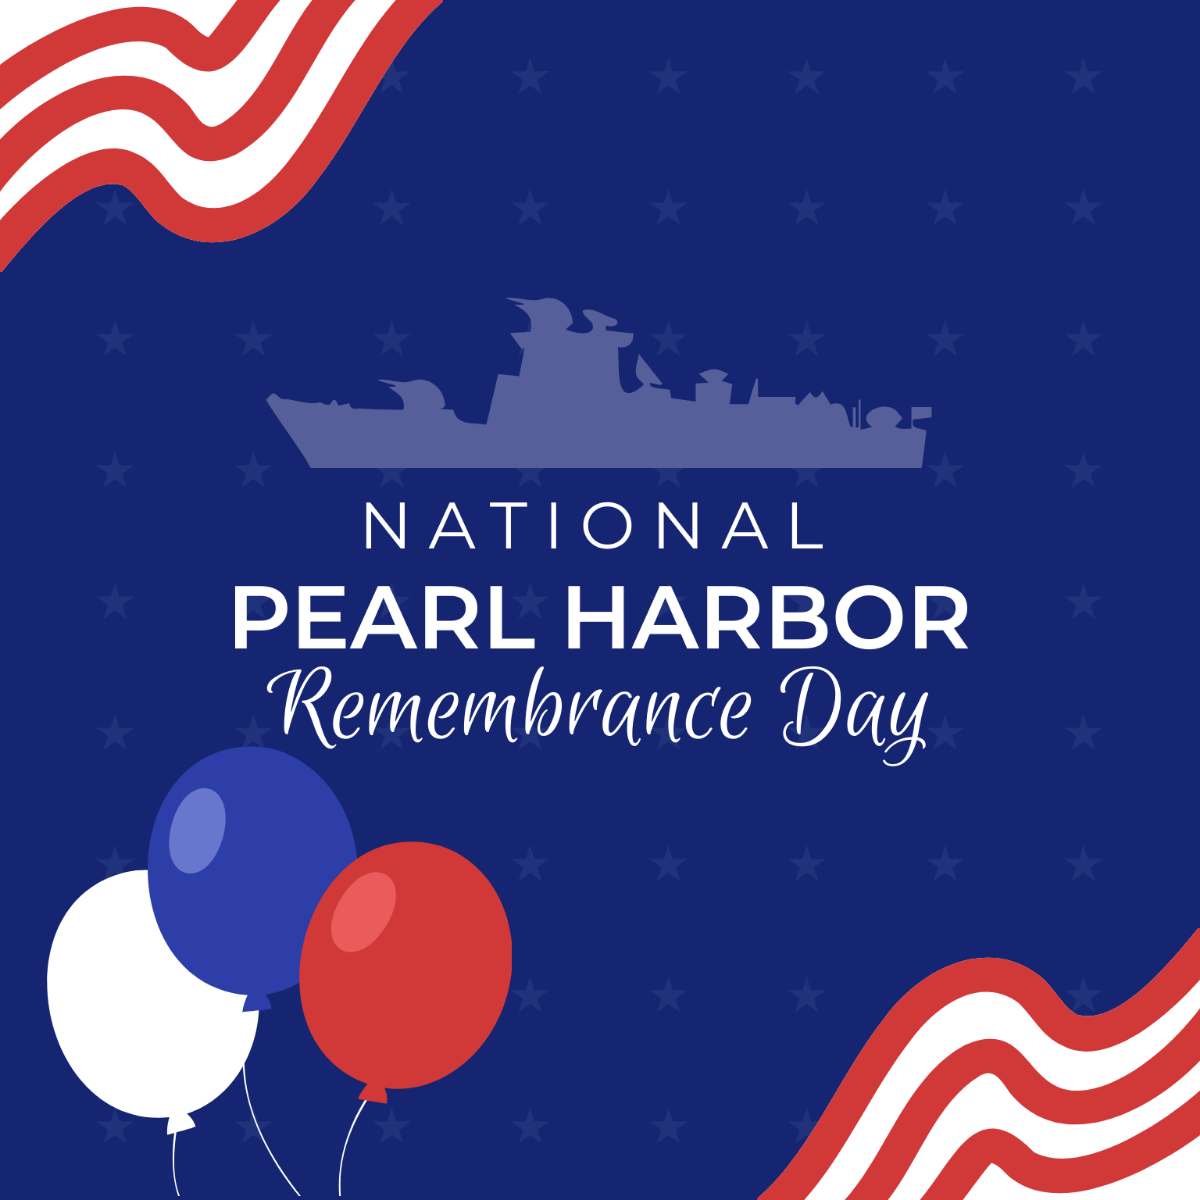 National Pearl Harbor Remembrance Day Cartoon Vector Template